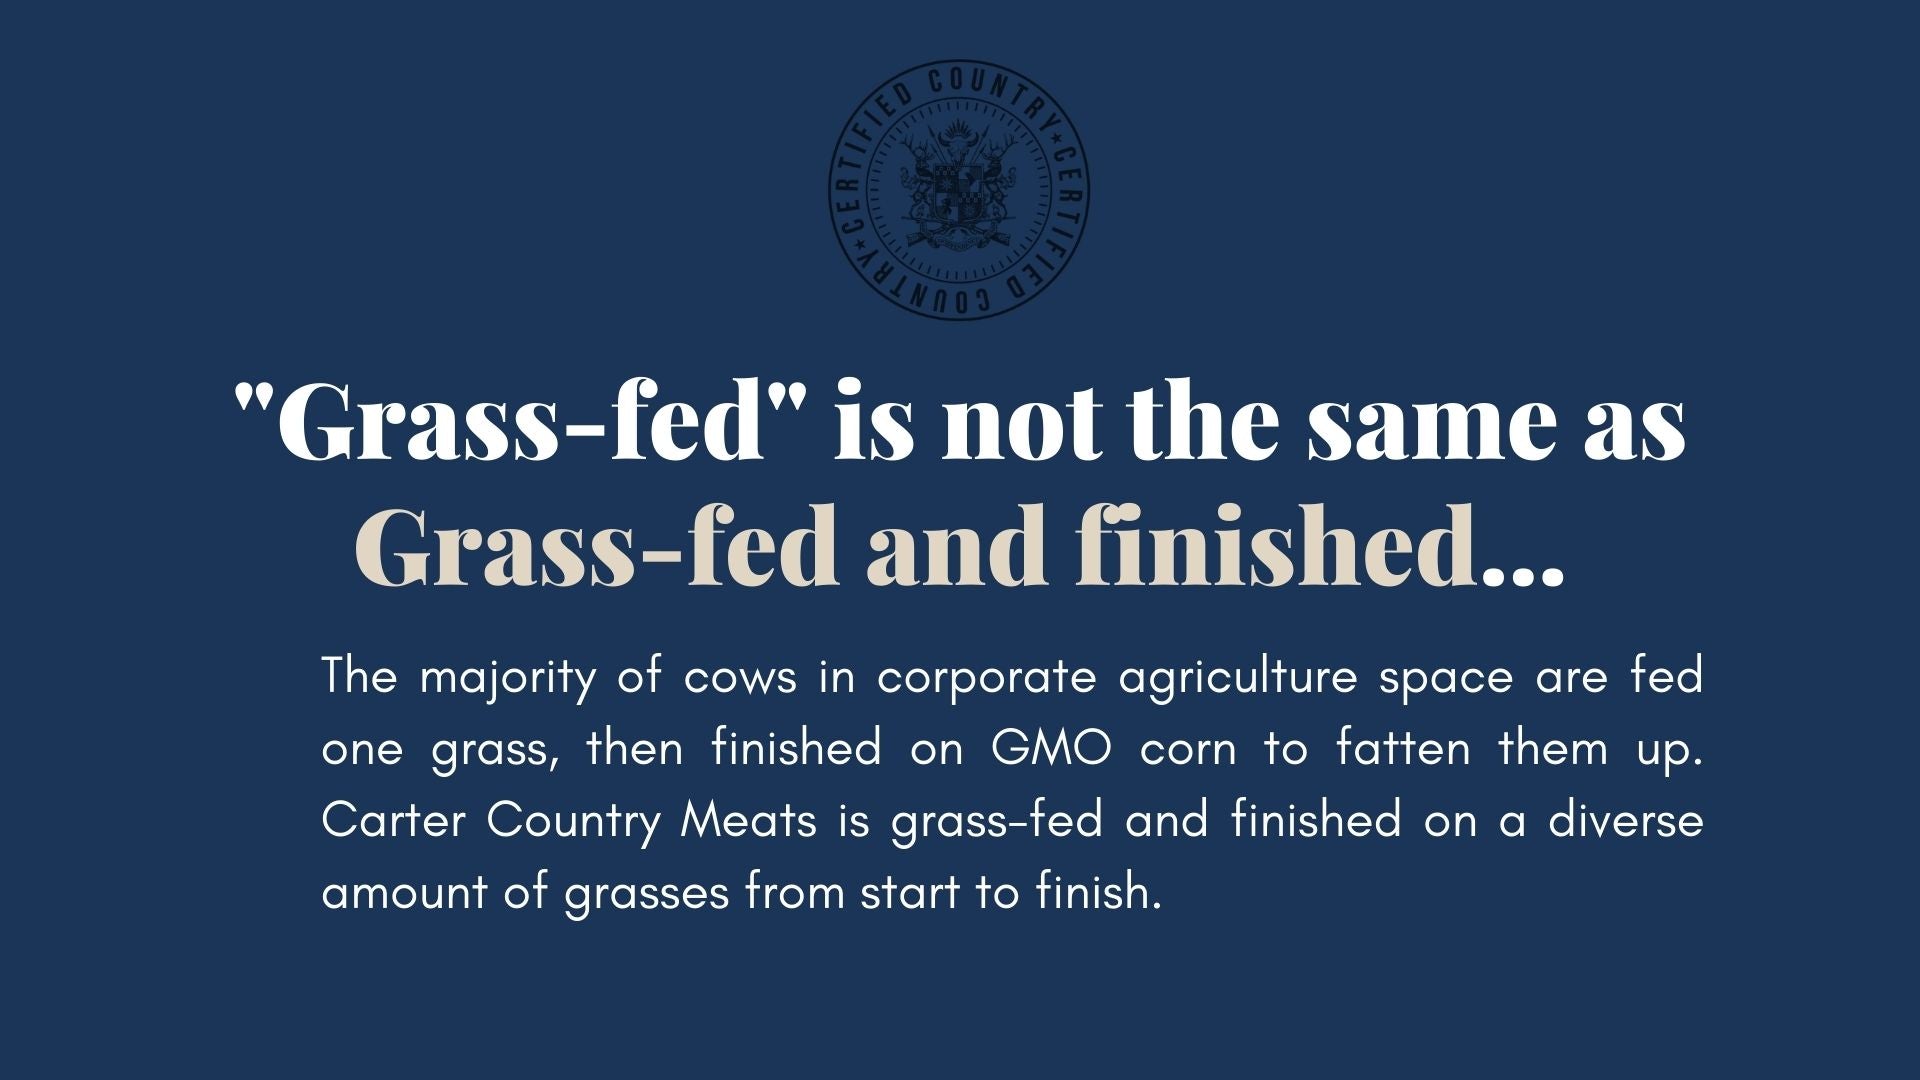 Grass-fed is NOT the same as Grass-fed & finished